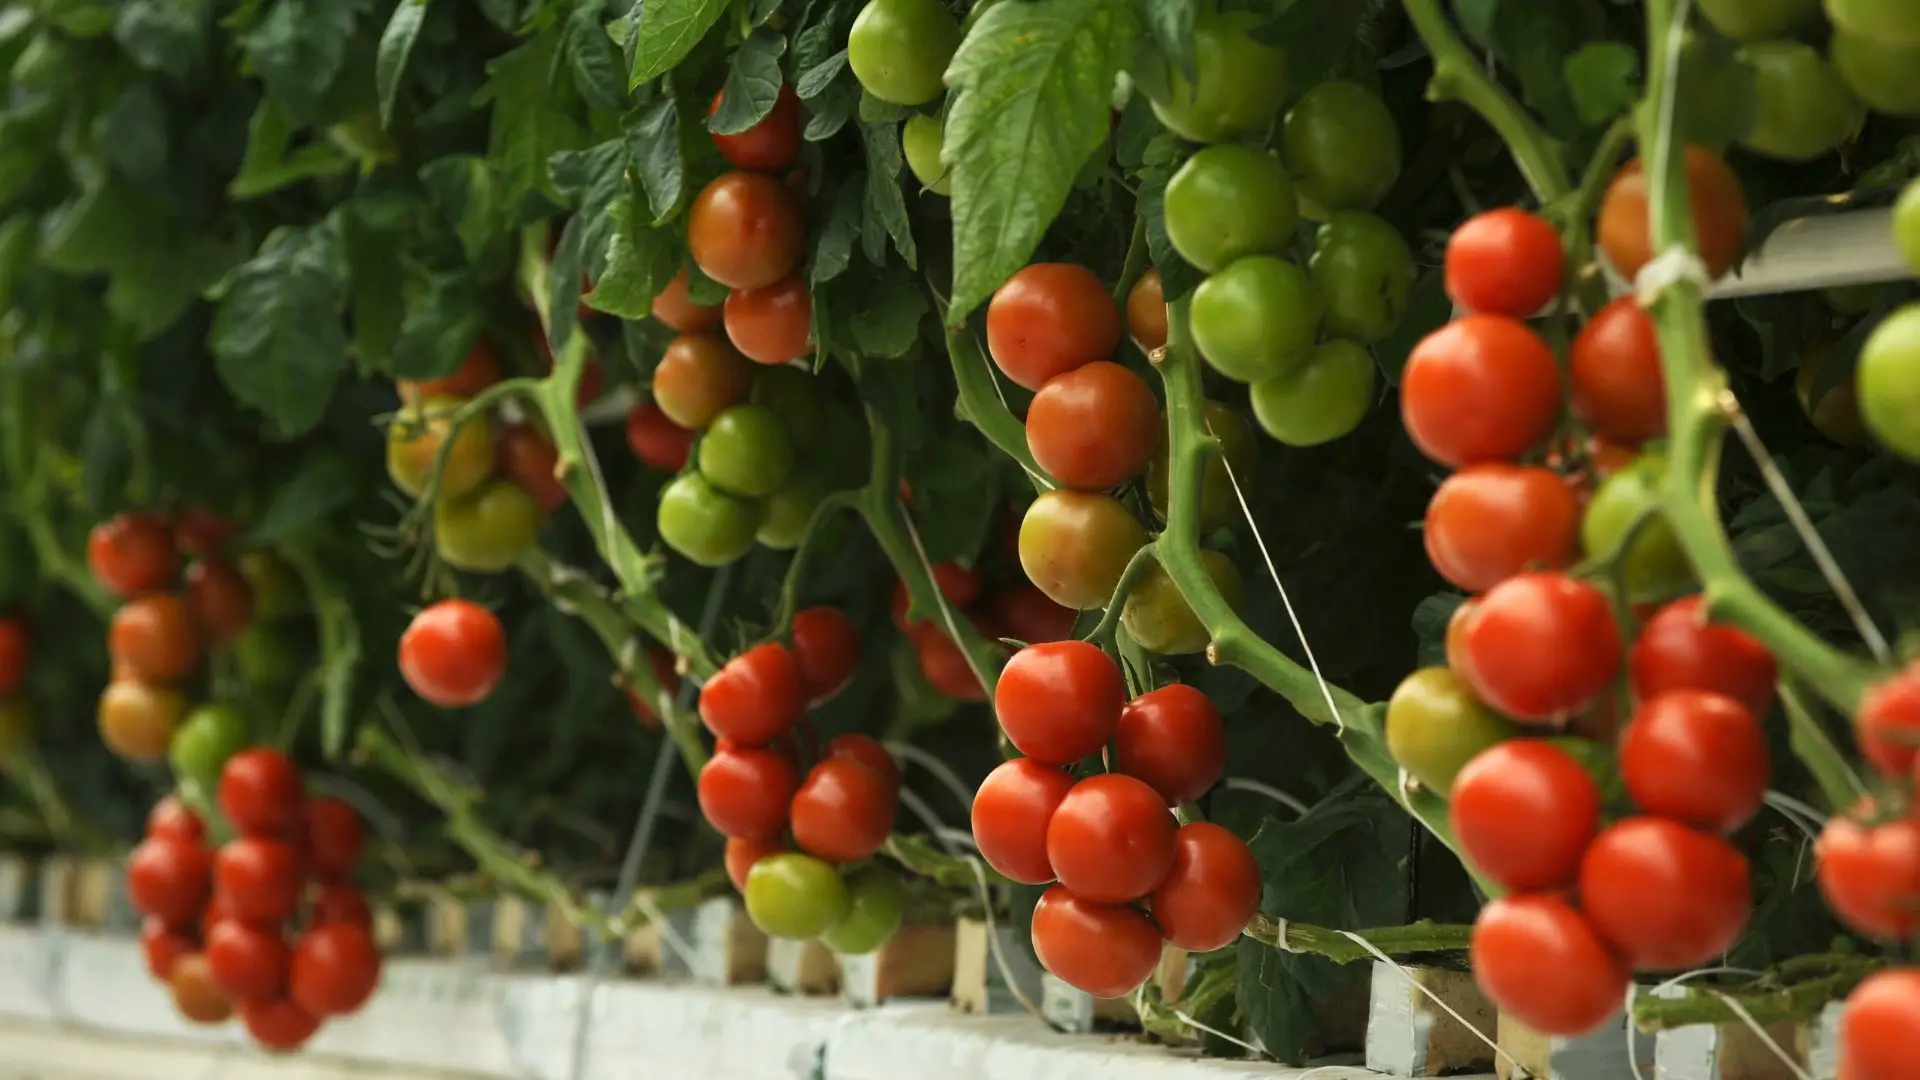 % If your hydroponic tomatoes aren't turning red, don't worry! This post will explore the possible causes and solutions.